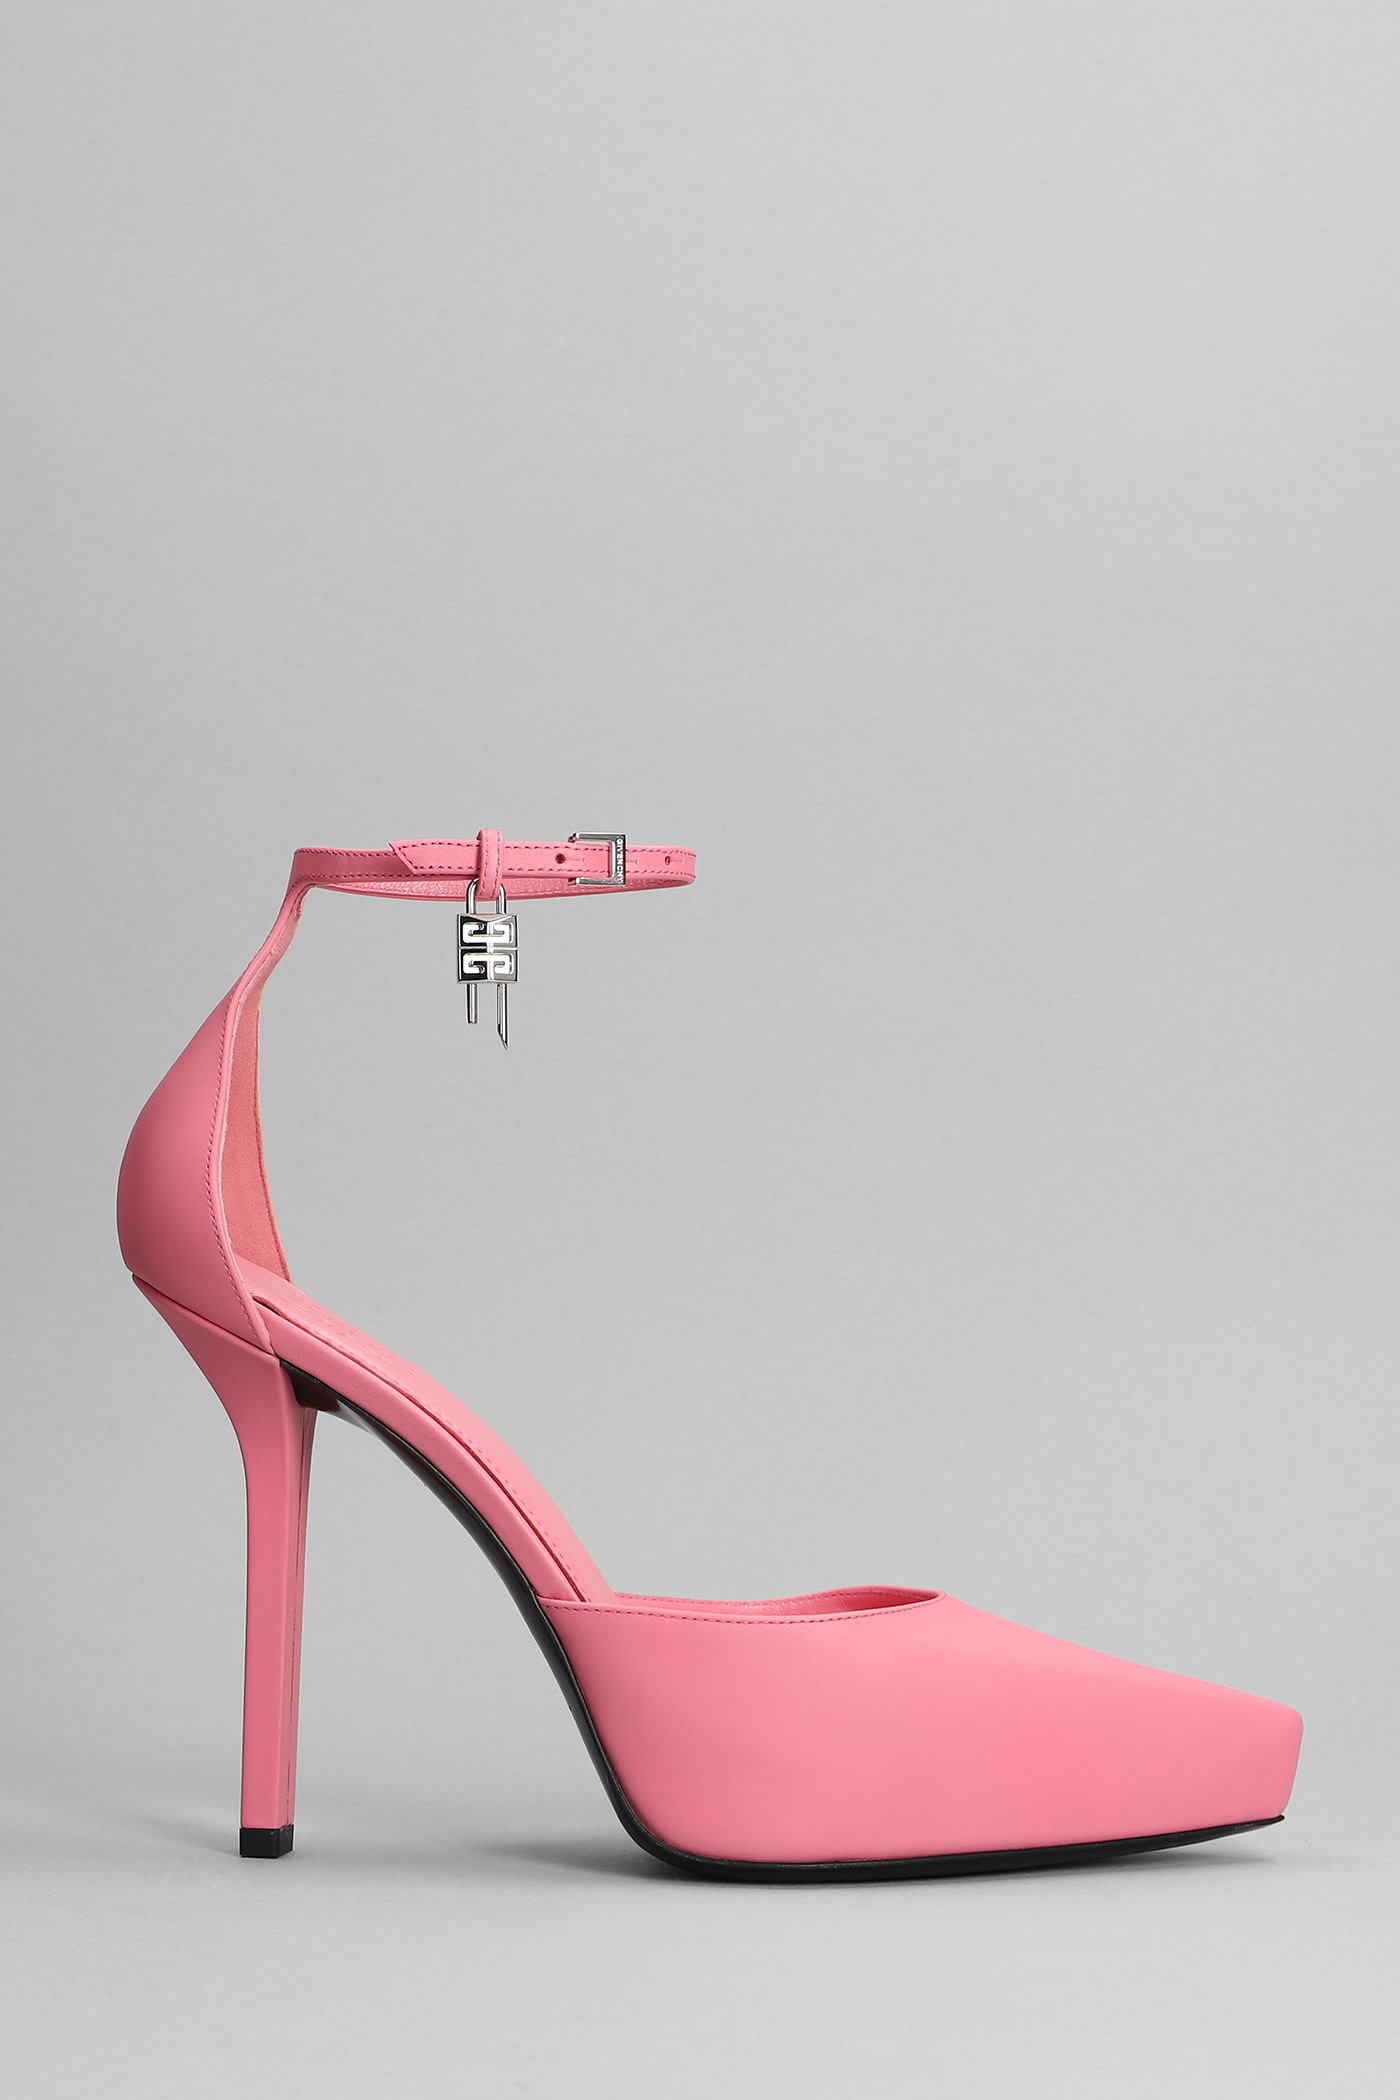 Givenchy Pumps In Rose-pink Leather